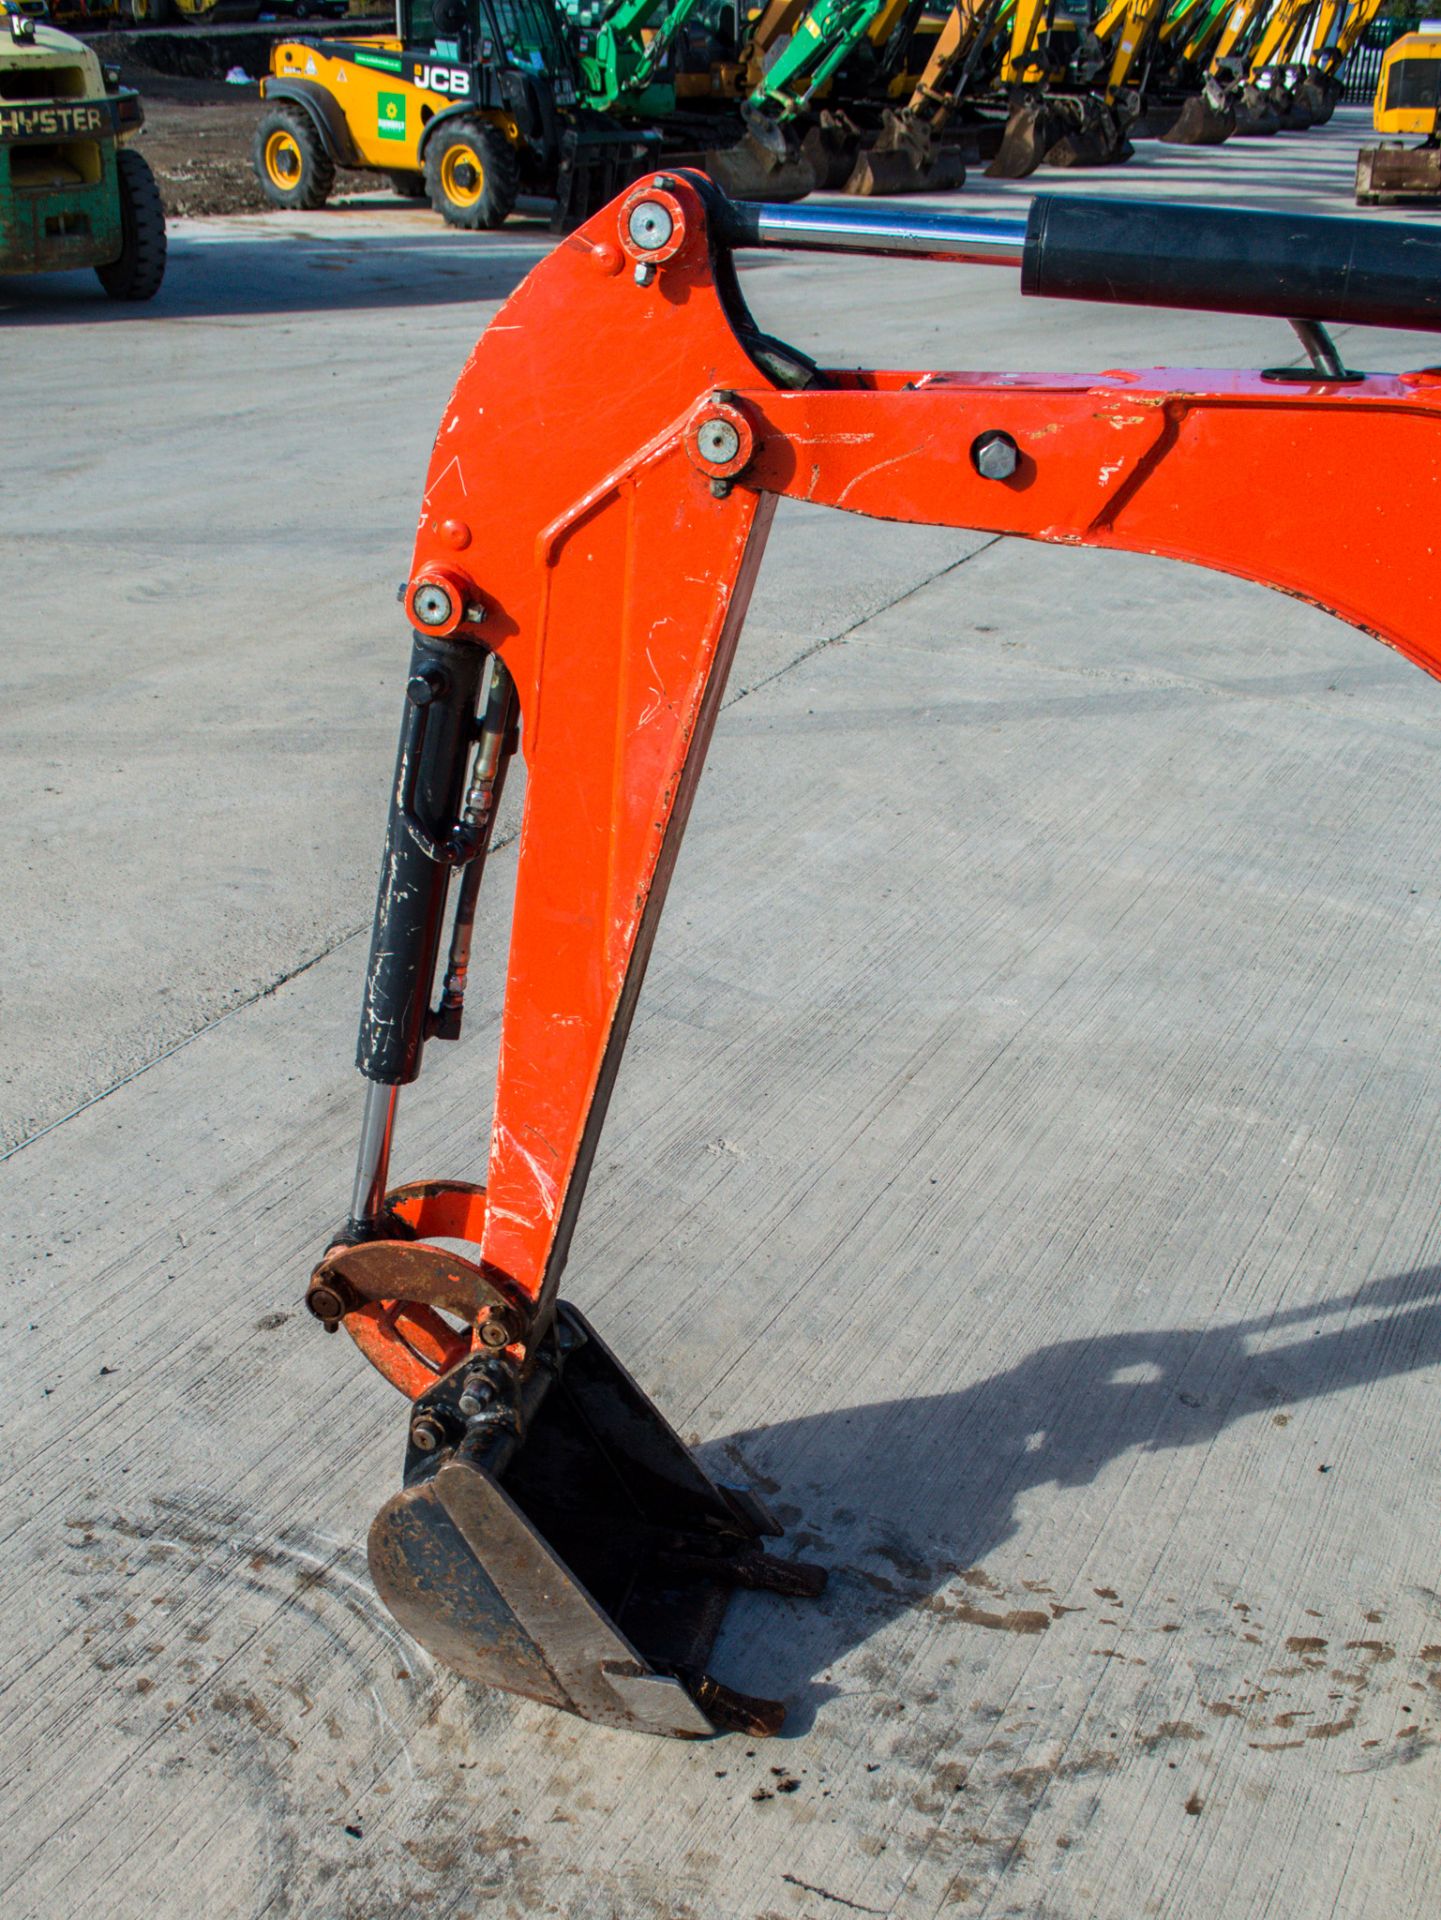 Kubota K008-3 0.8 tonne rubber tracked micro excavator Year: 2018 S/N: 30712 Recorded Hours: 837 - Image 12 of 20